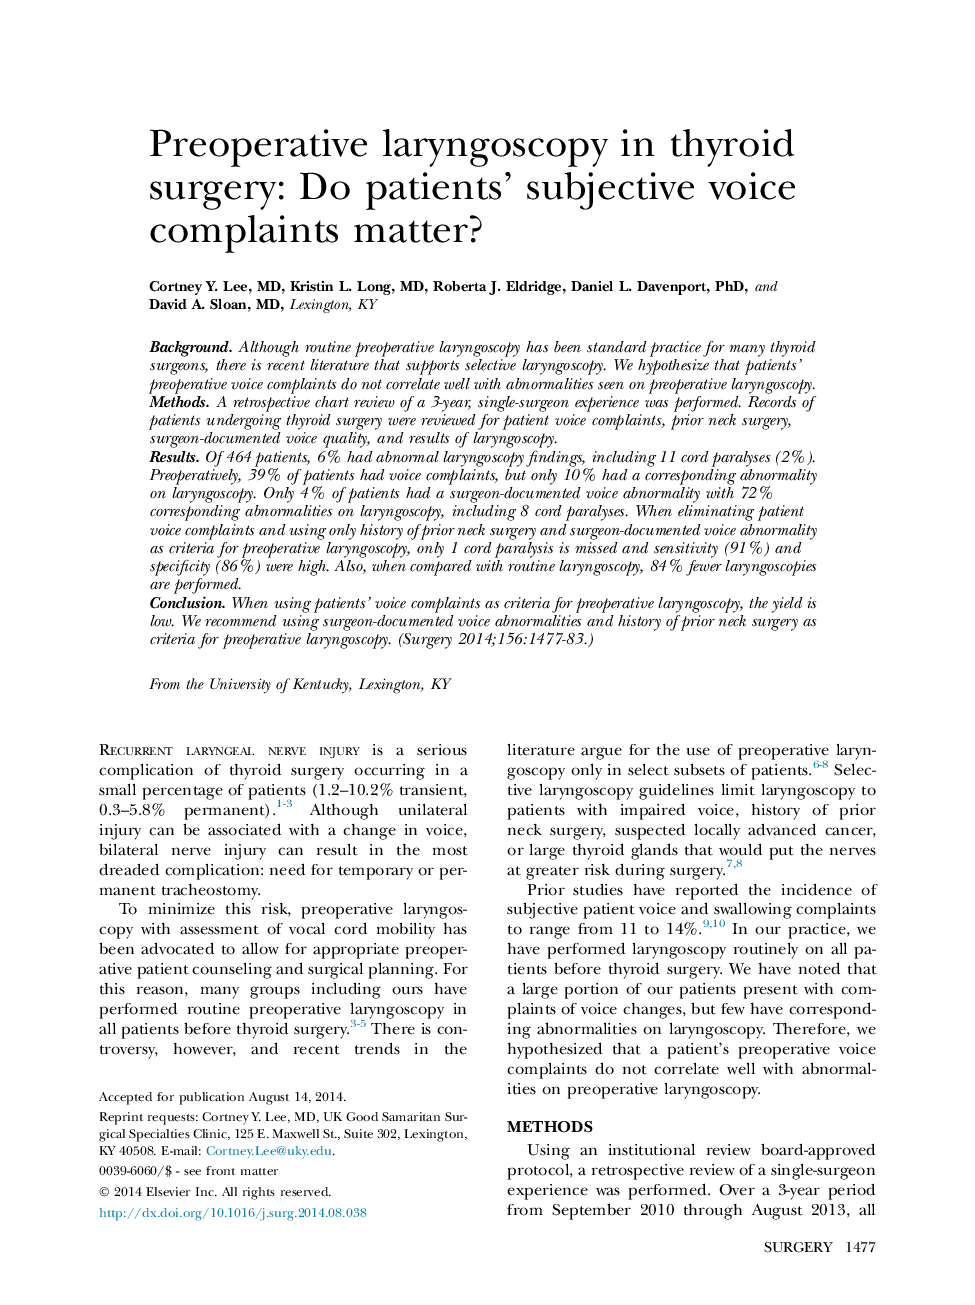 Preoperative laryngoscopy in thyroid surgery: Do patients' subjective voice complaints matter?